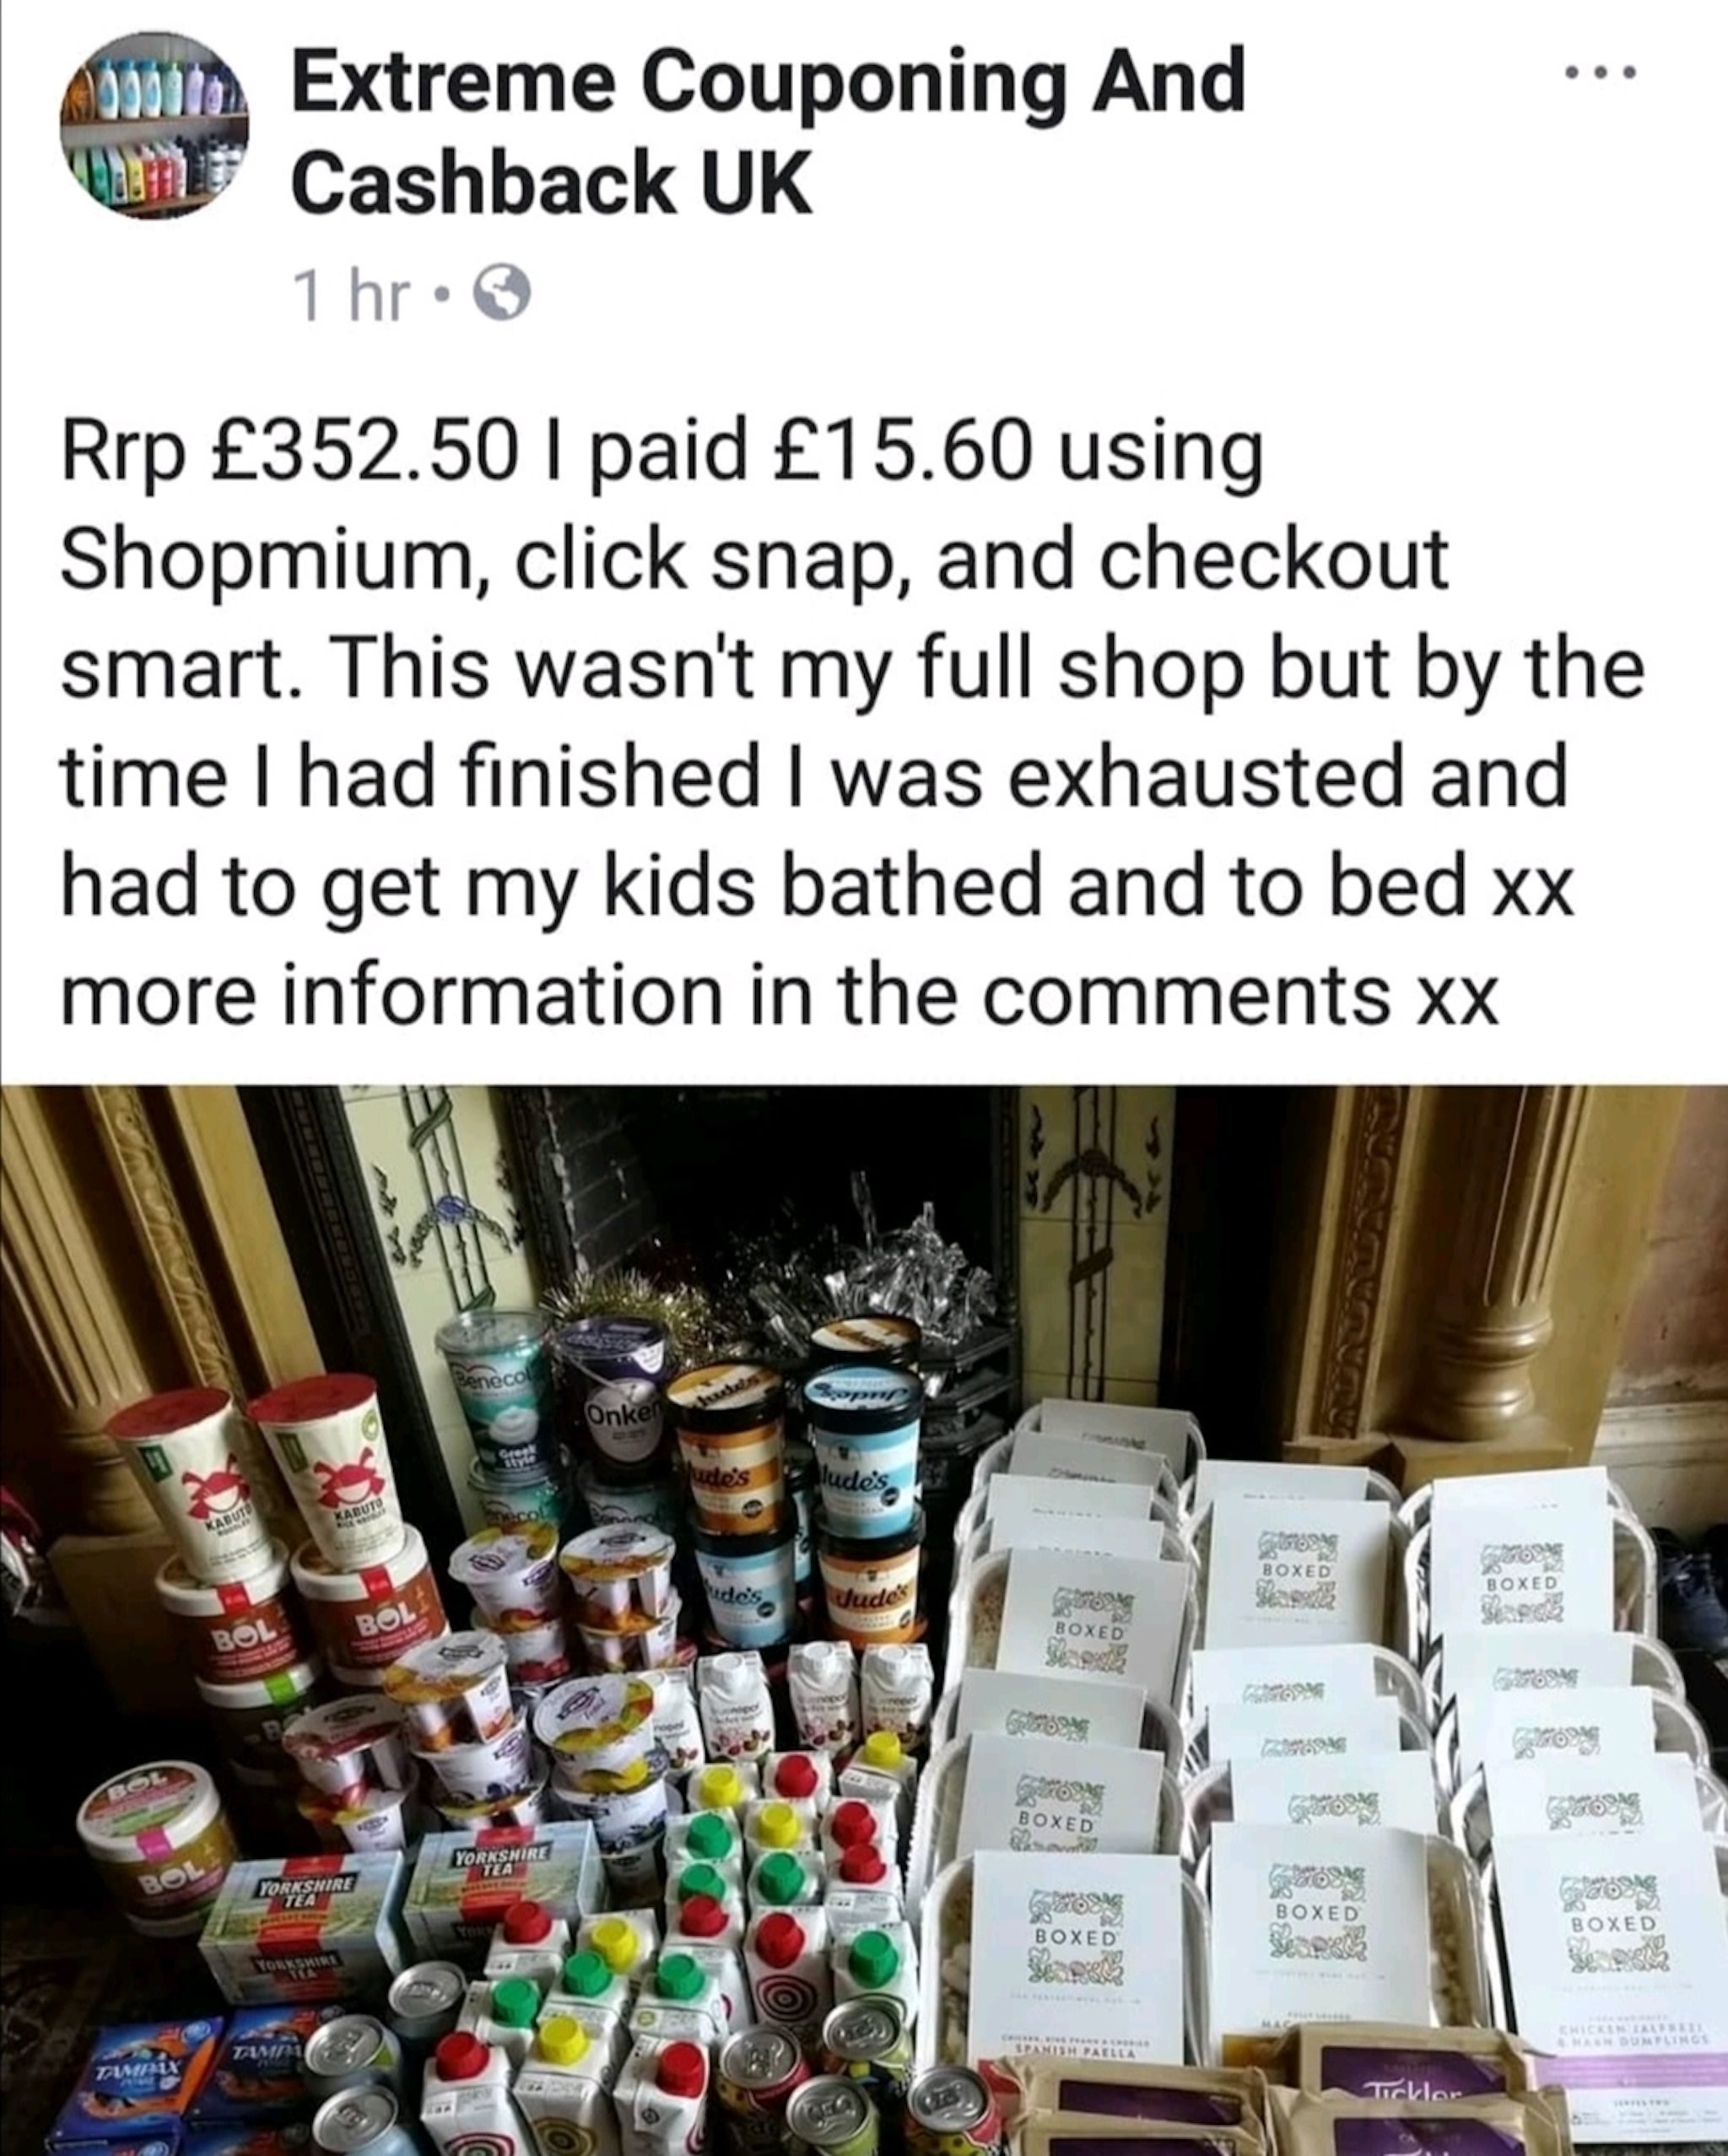 Aimee Balta, who did her whole Christmas shop last month for under £50, shares cashback tips on her Facebook page